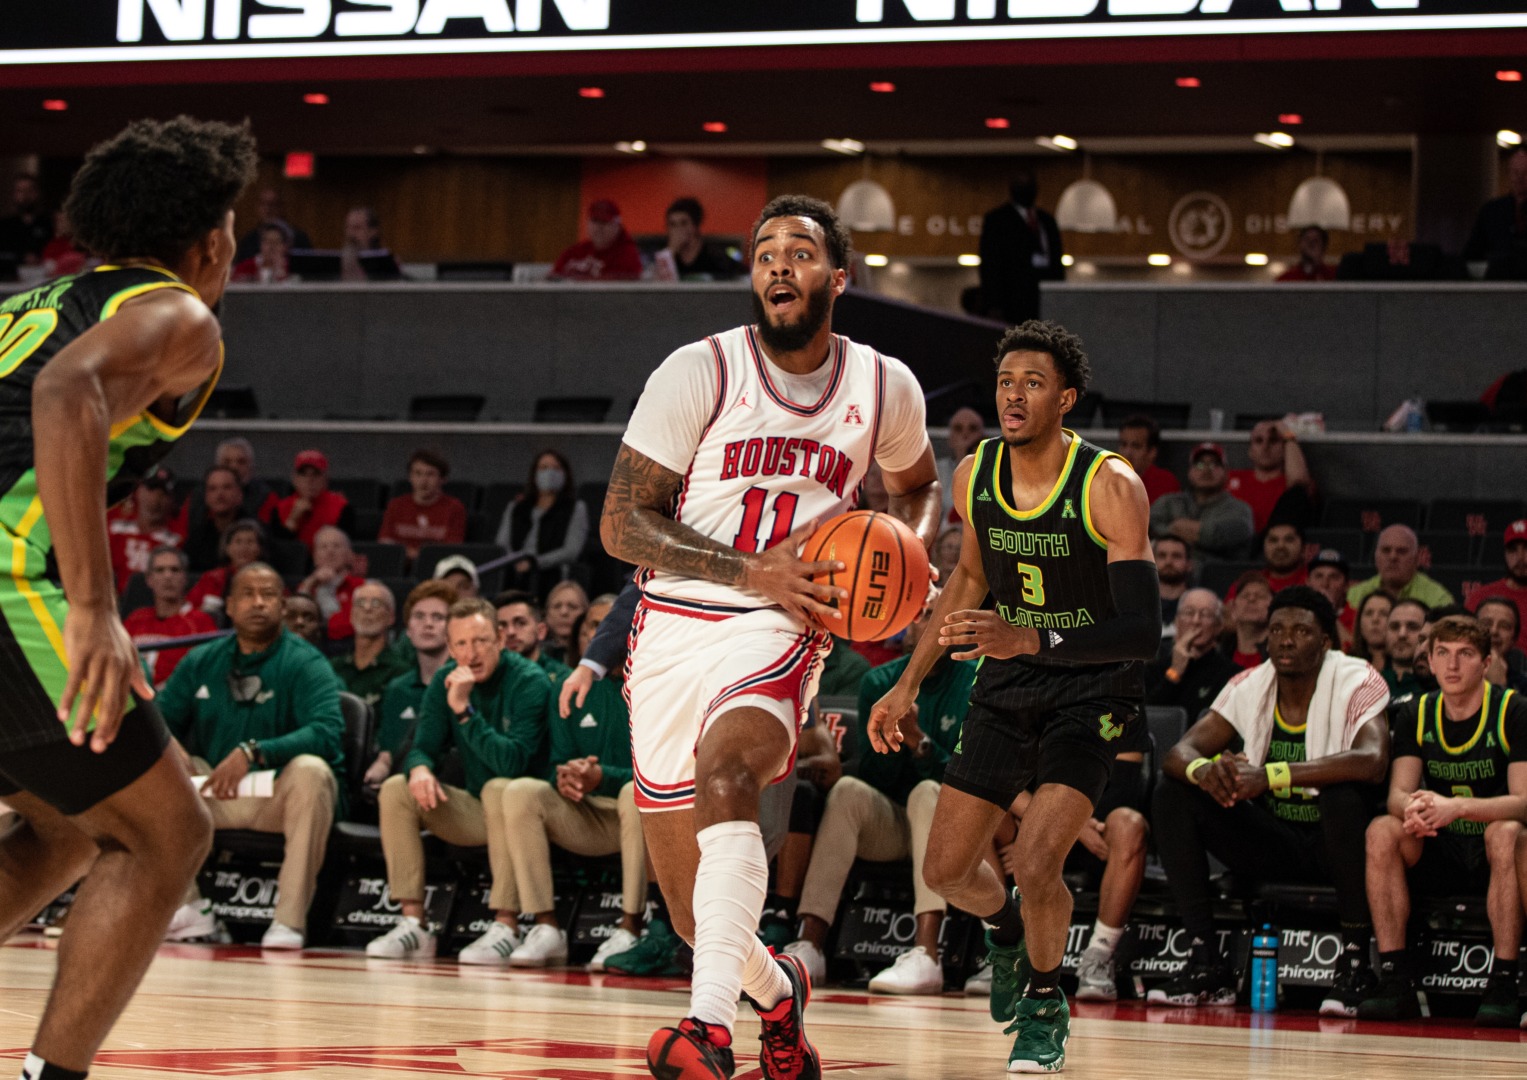 UH guard Kyler Edwards scored a game-high 23 points in the Cougars victory over USF on Tuesday night at Fertitta Center. | Sean Thomas/The Cougar